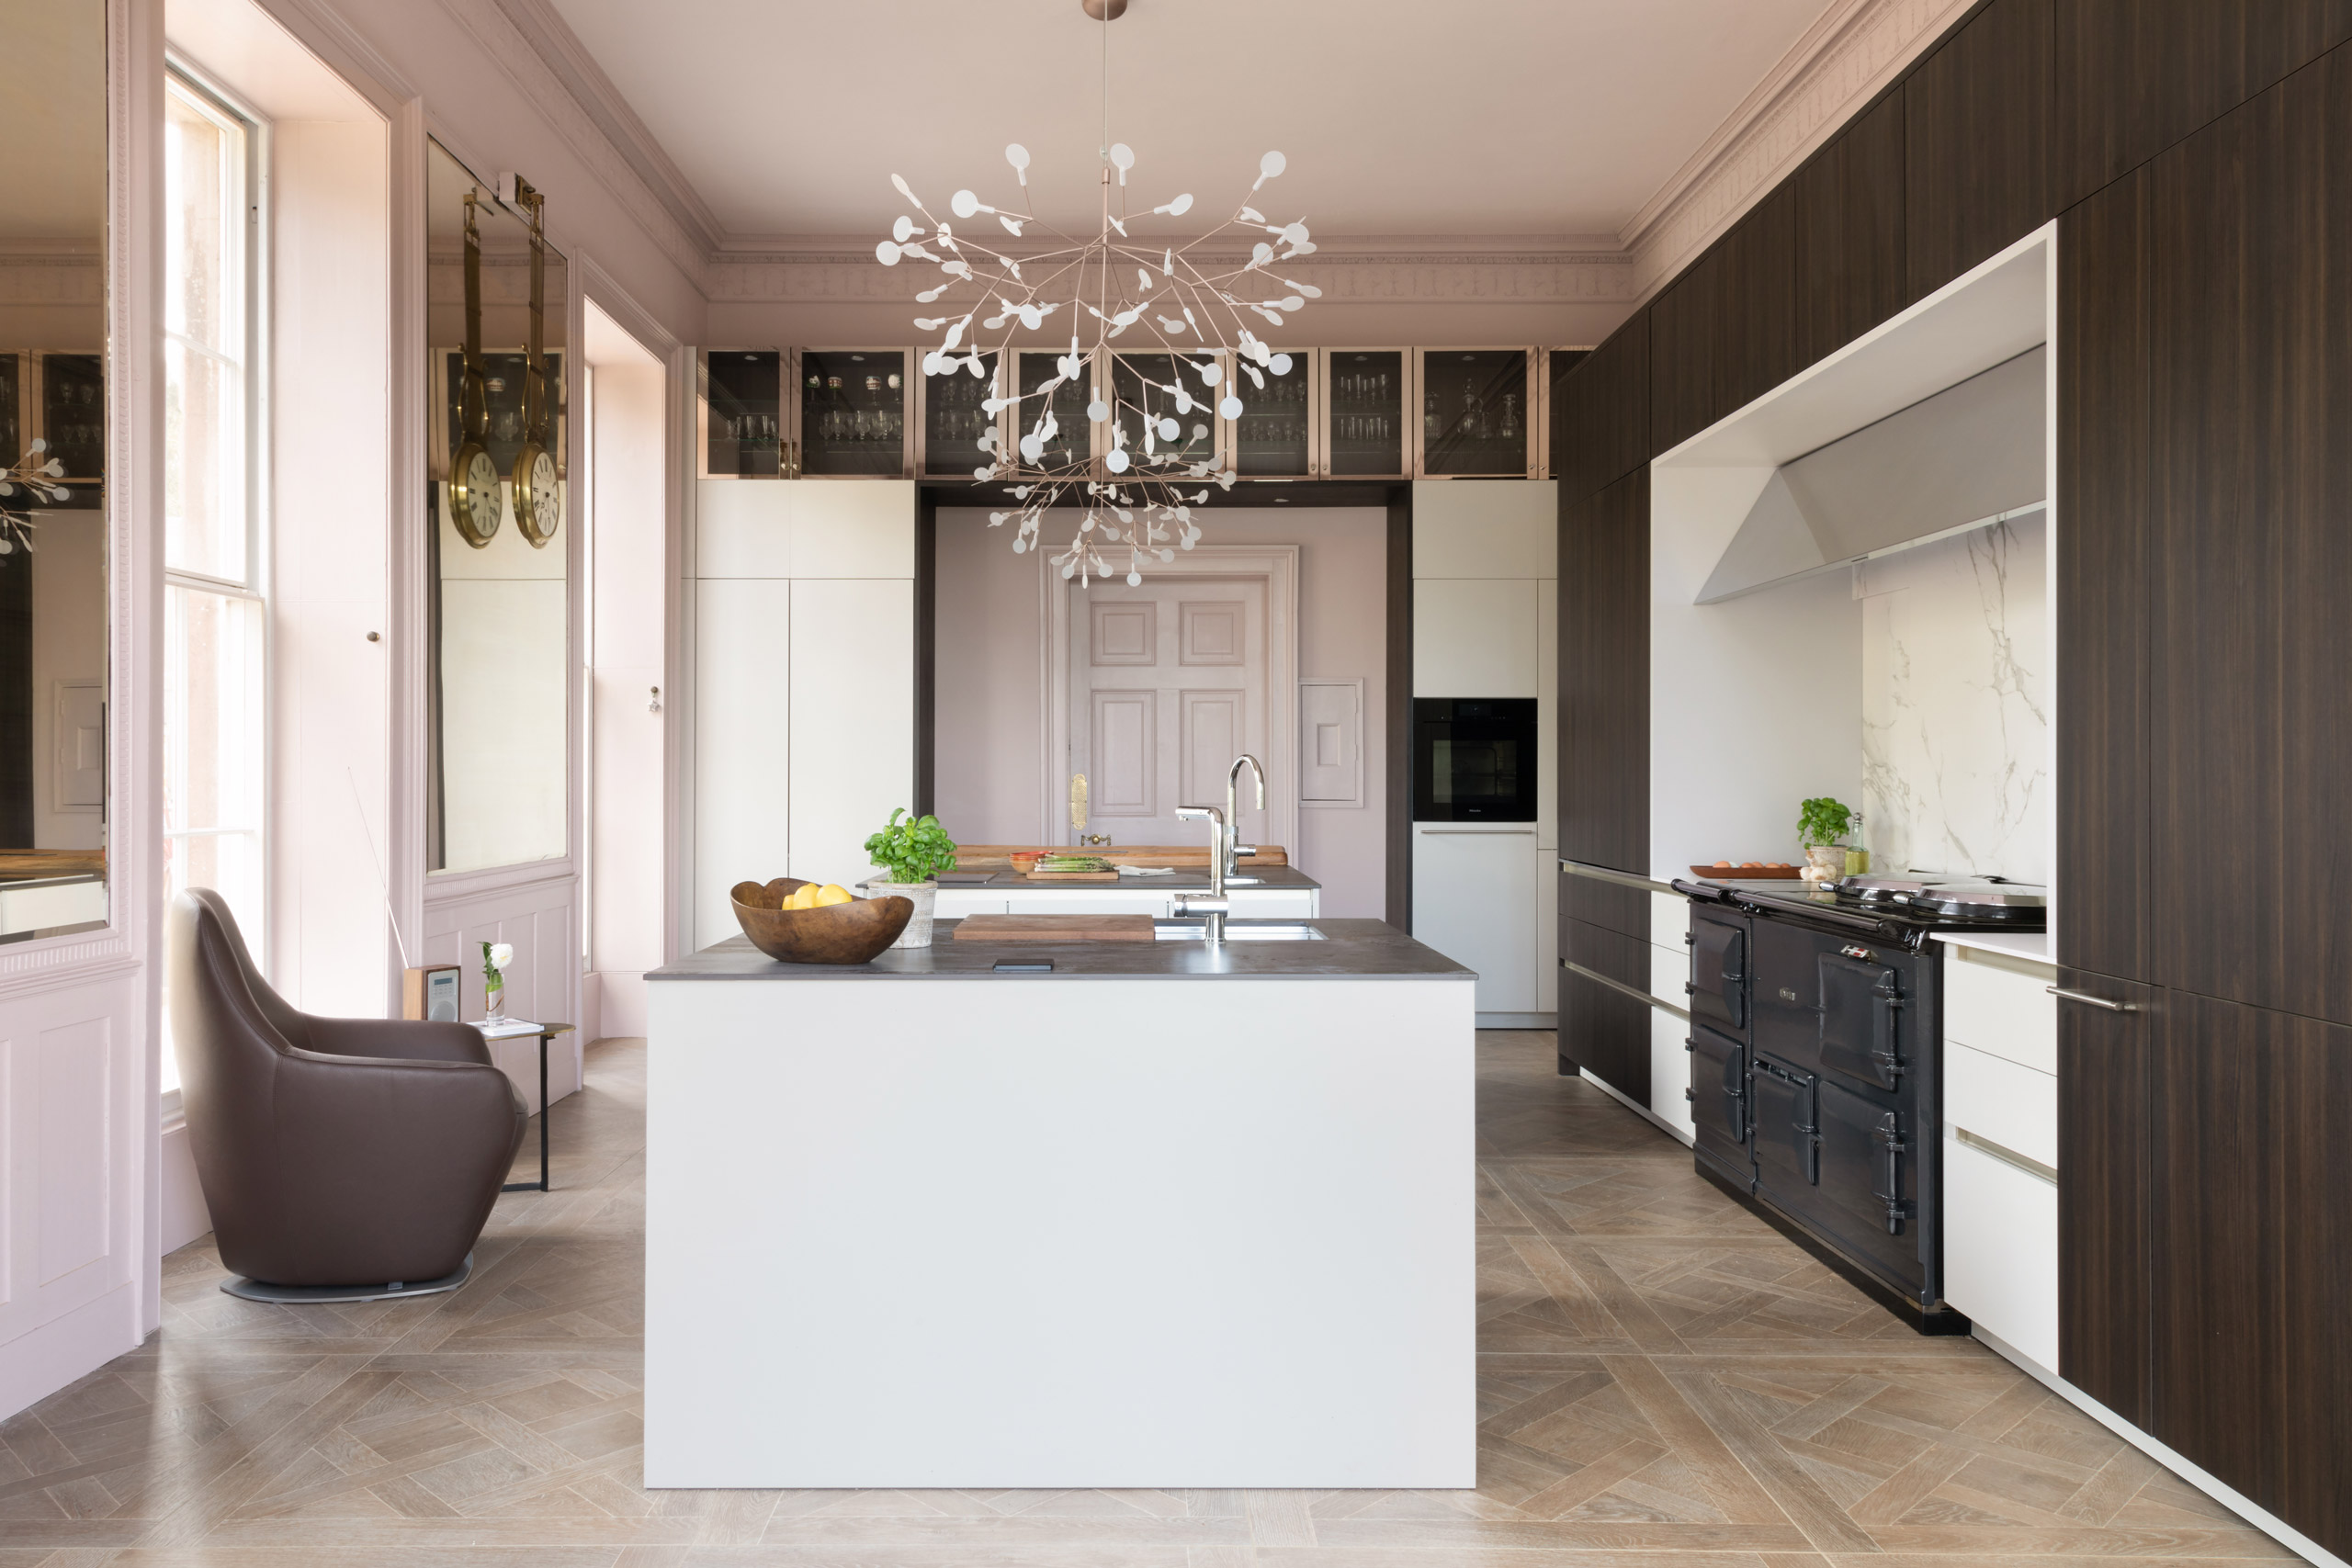 A stately kitchen | island | The Myers Touch